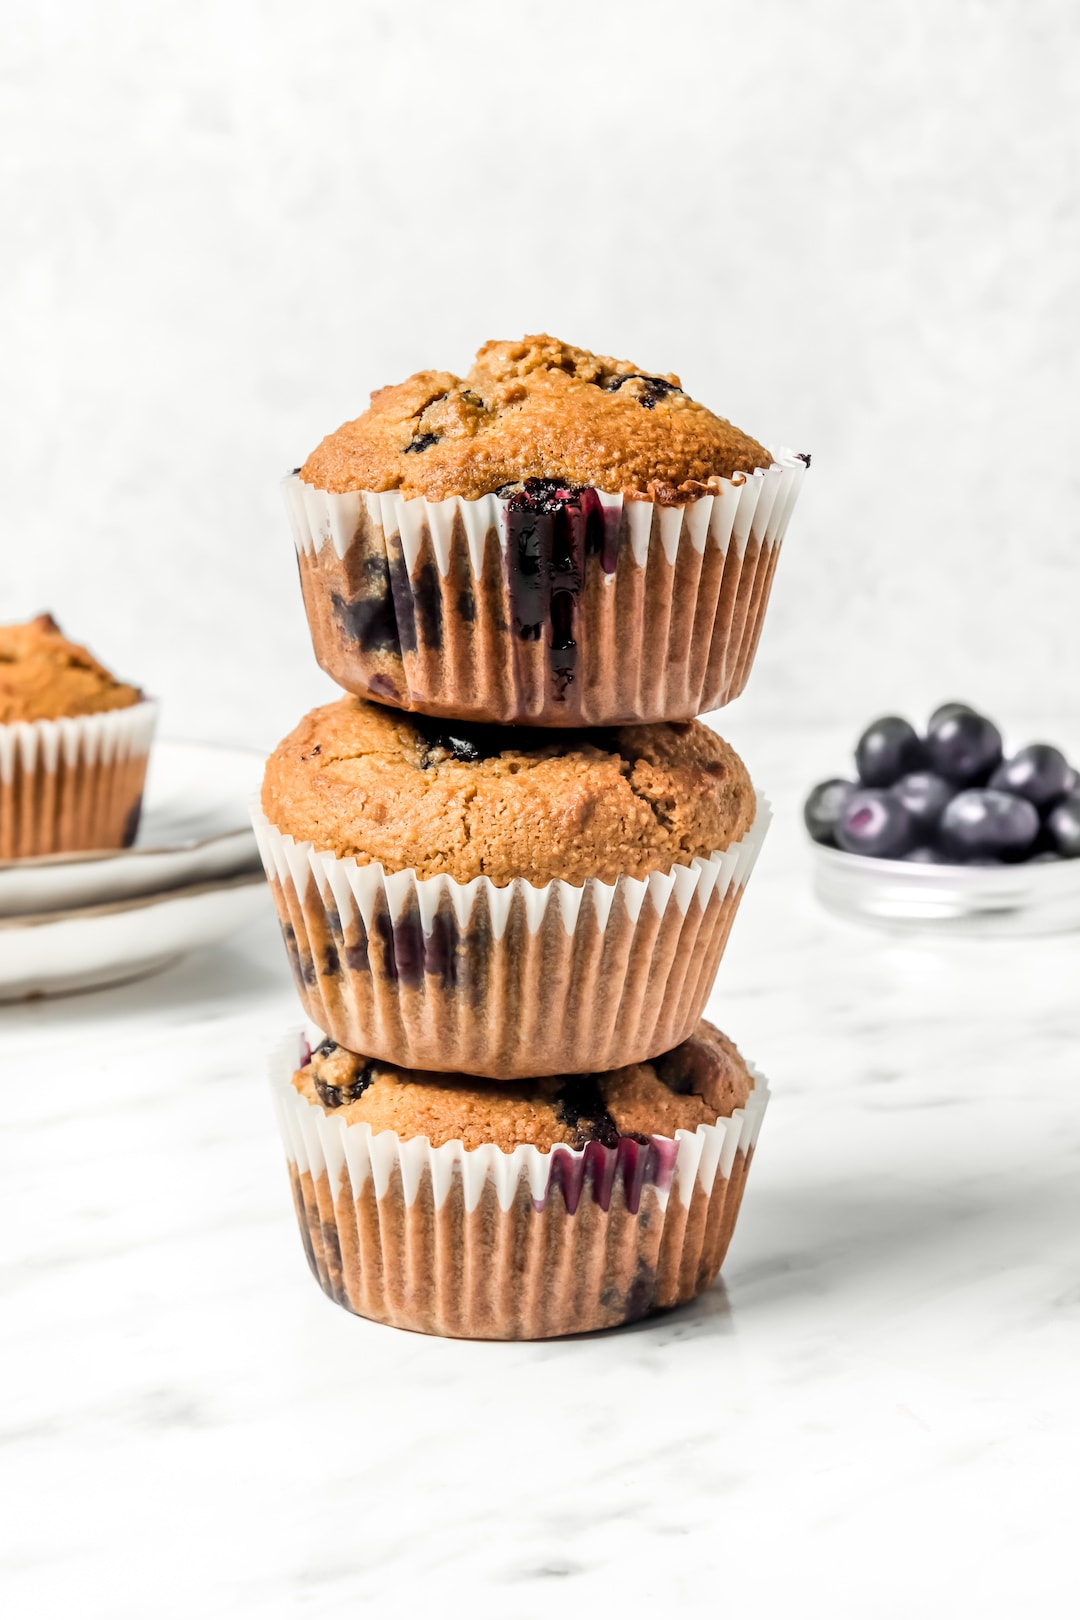 Three stacked Fluffy Almond Flour Blueberry Muffins